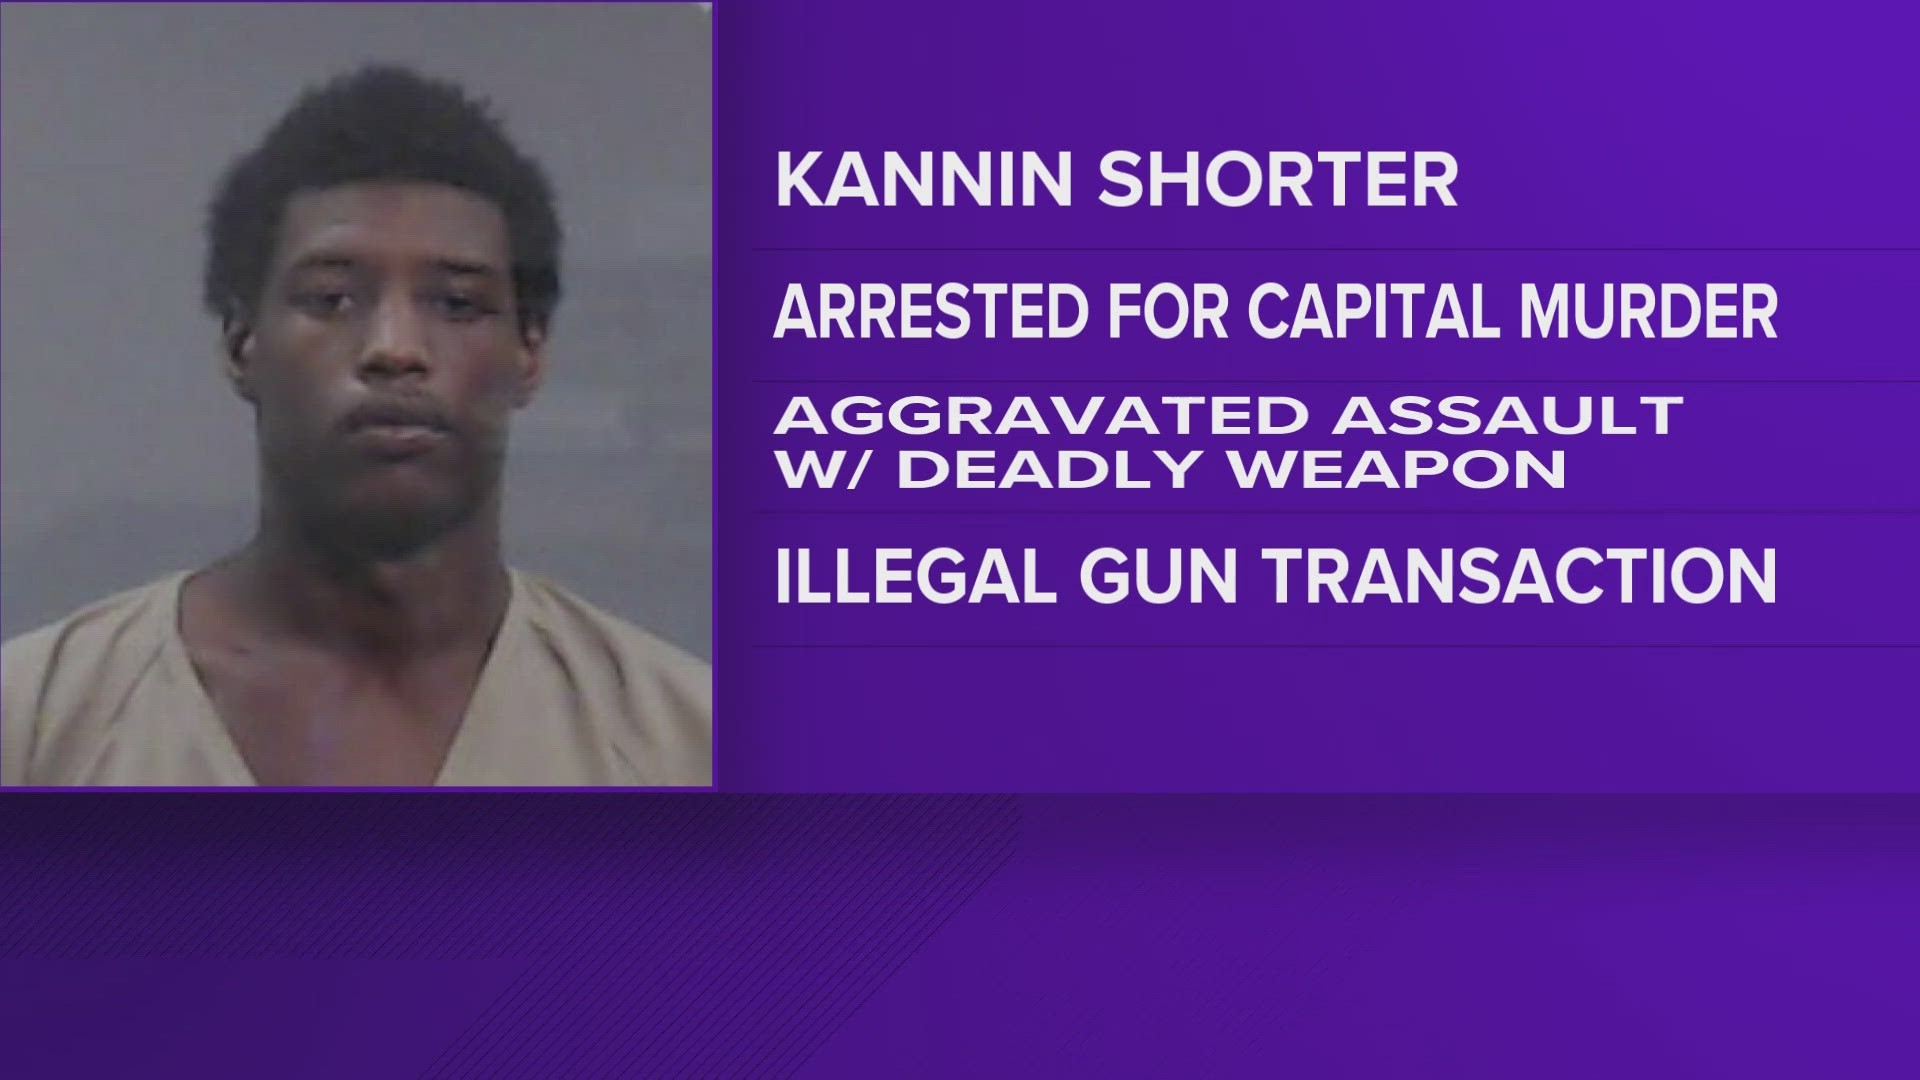 Kannin Shorter has been arrested by the Odessa Police Department Wednesday night. Shorter is charged with aggravated assault with a deadly weapon along with murder.